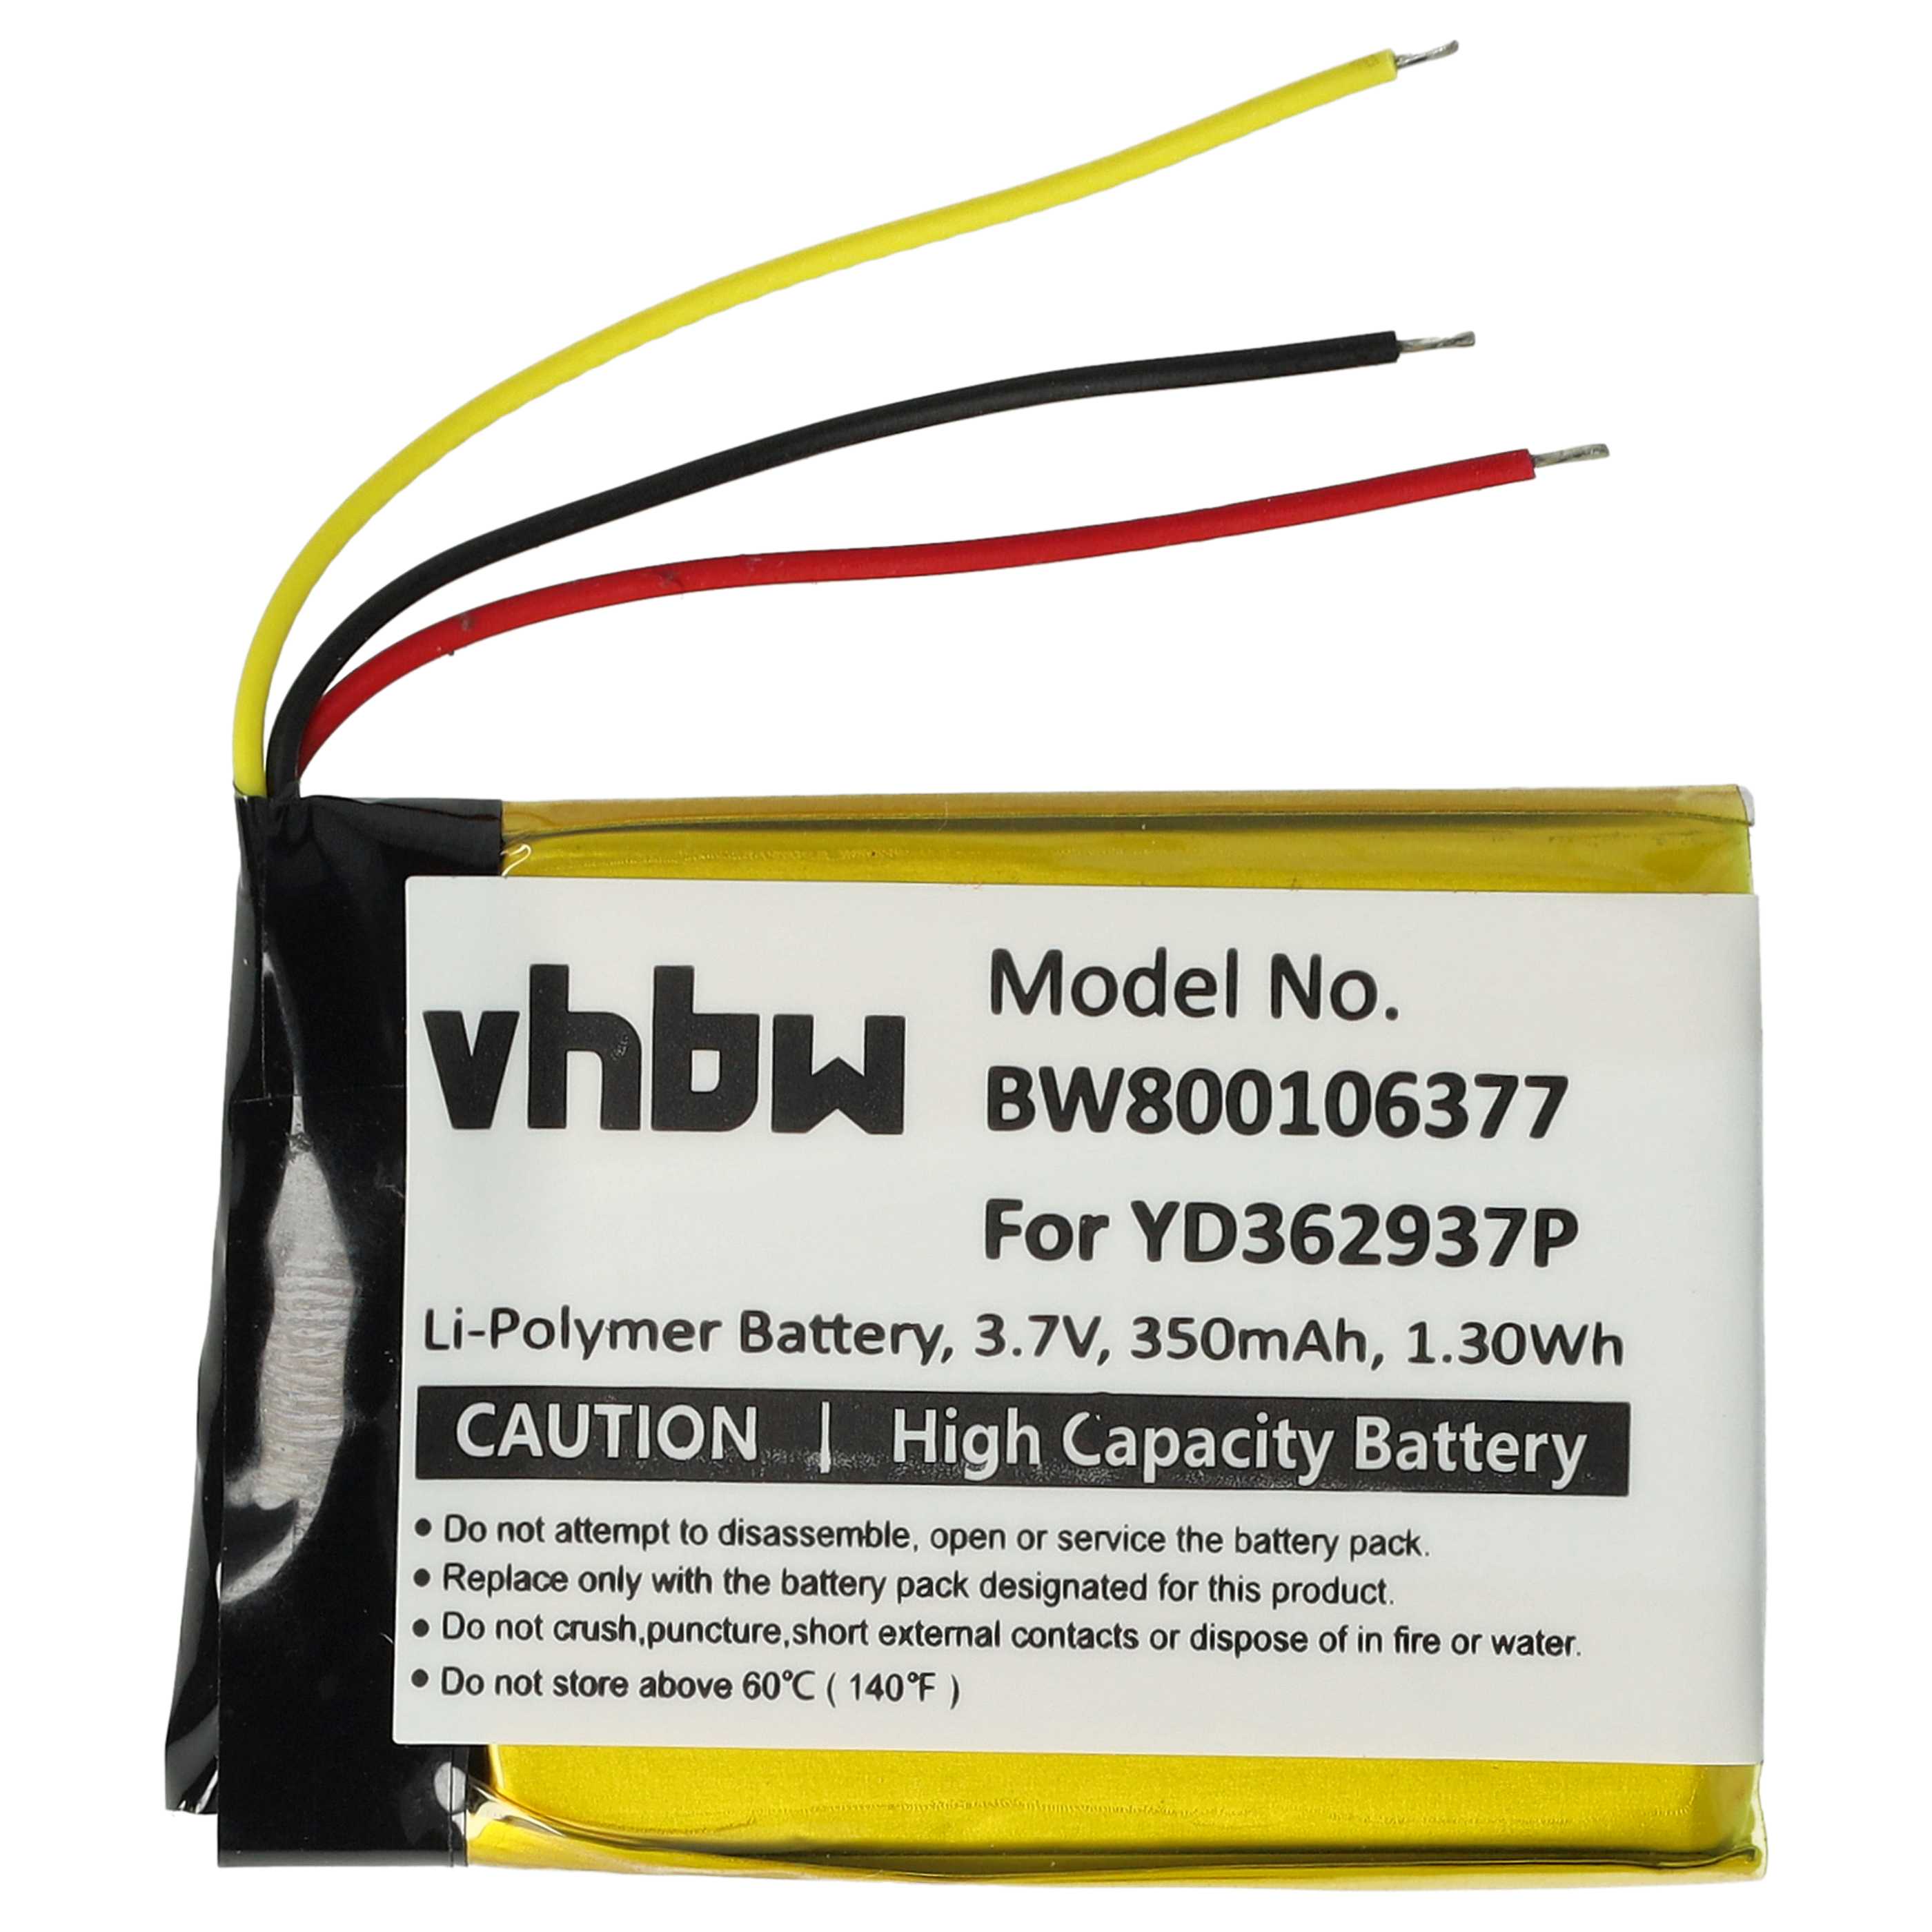 Remote Control Battery Replacement for GoPro YD362937P - 350mAh 3.7V Li-polymer